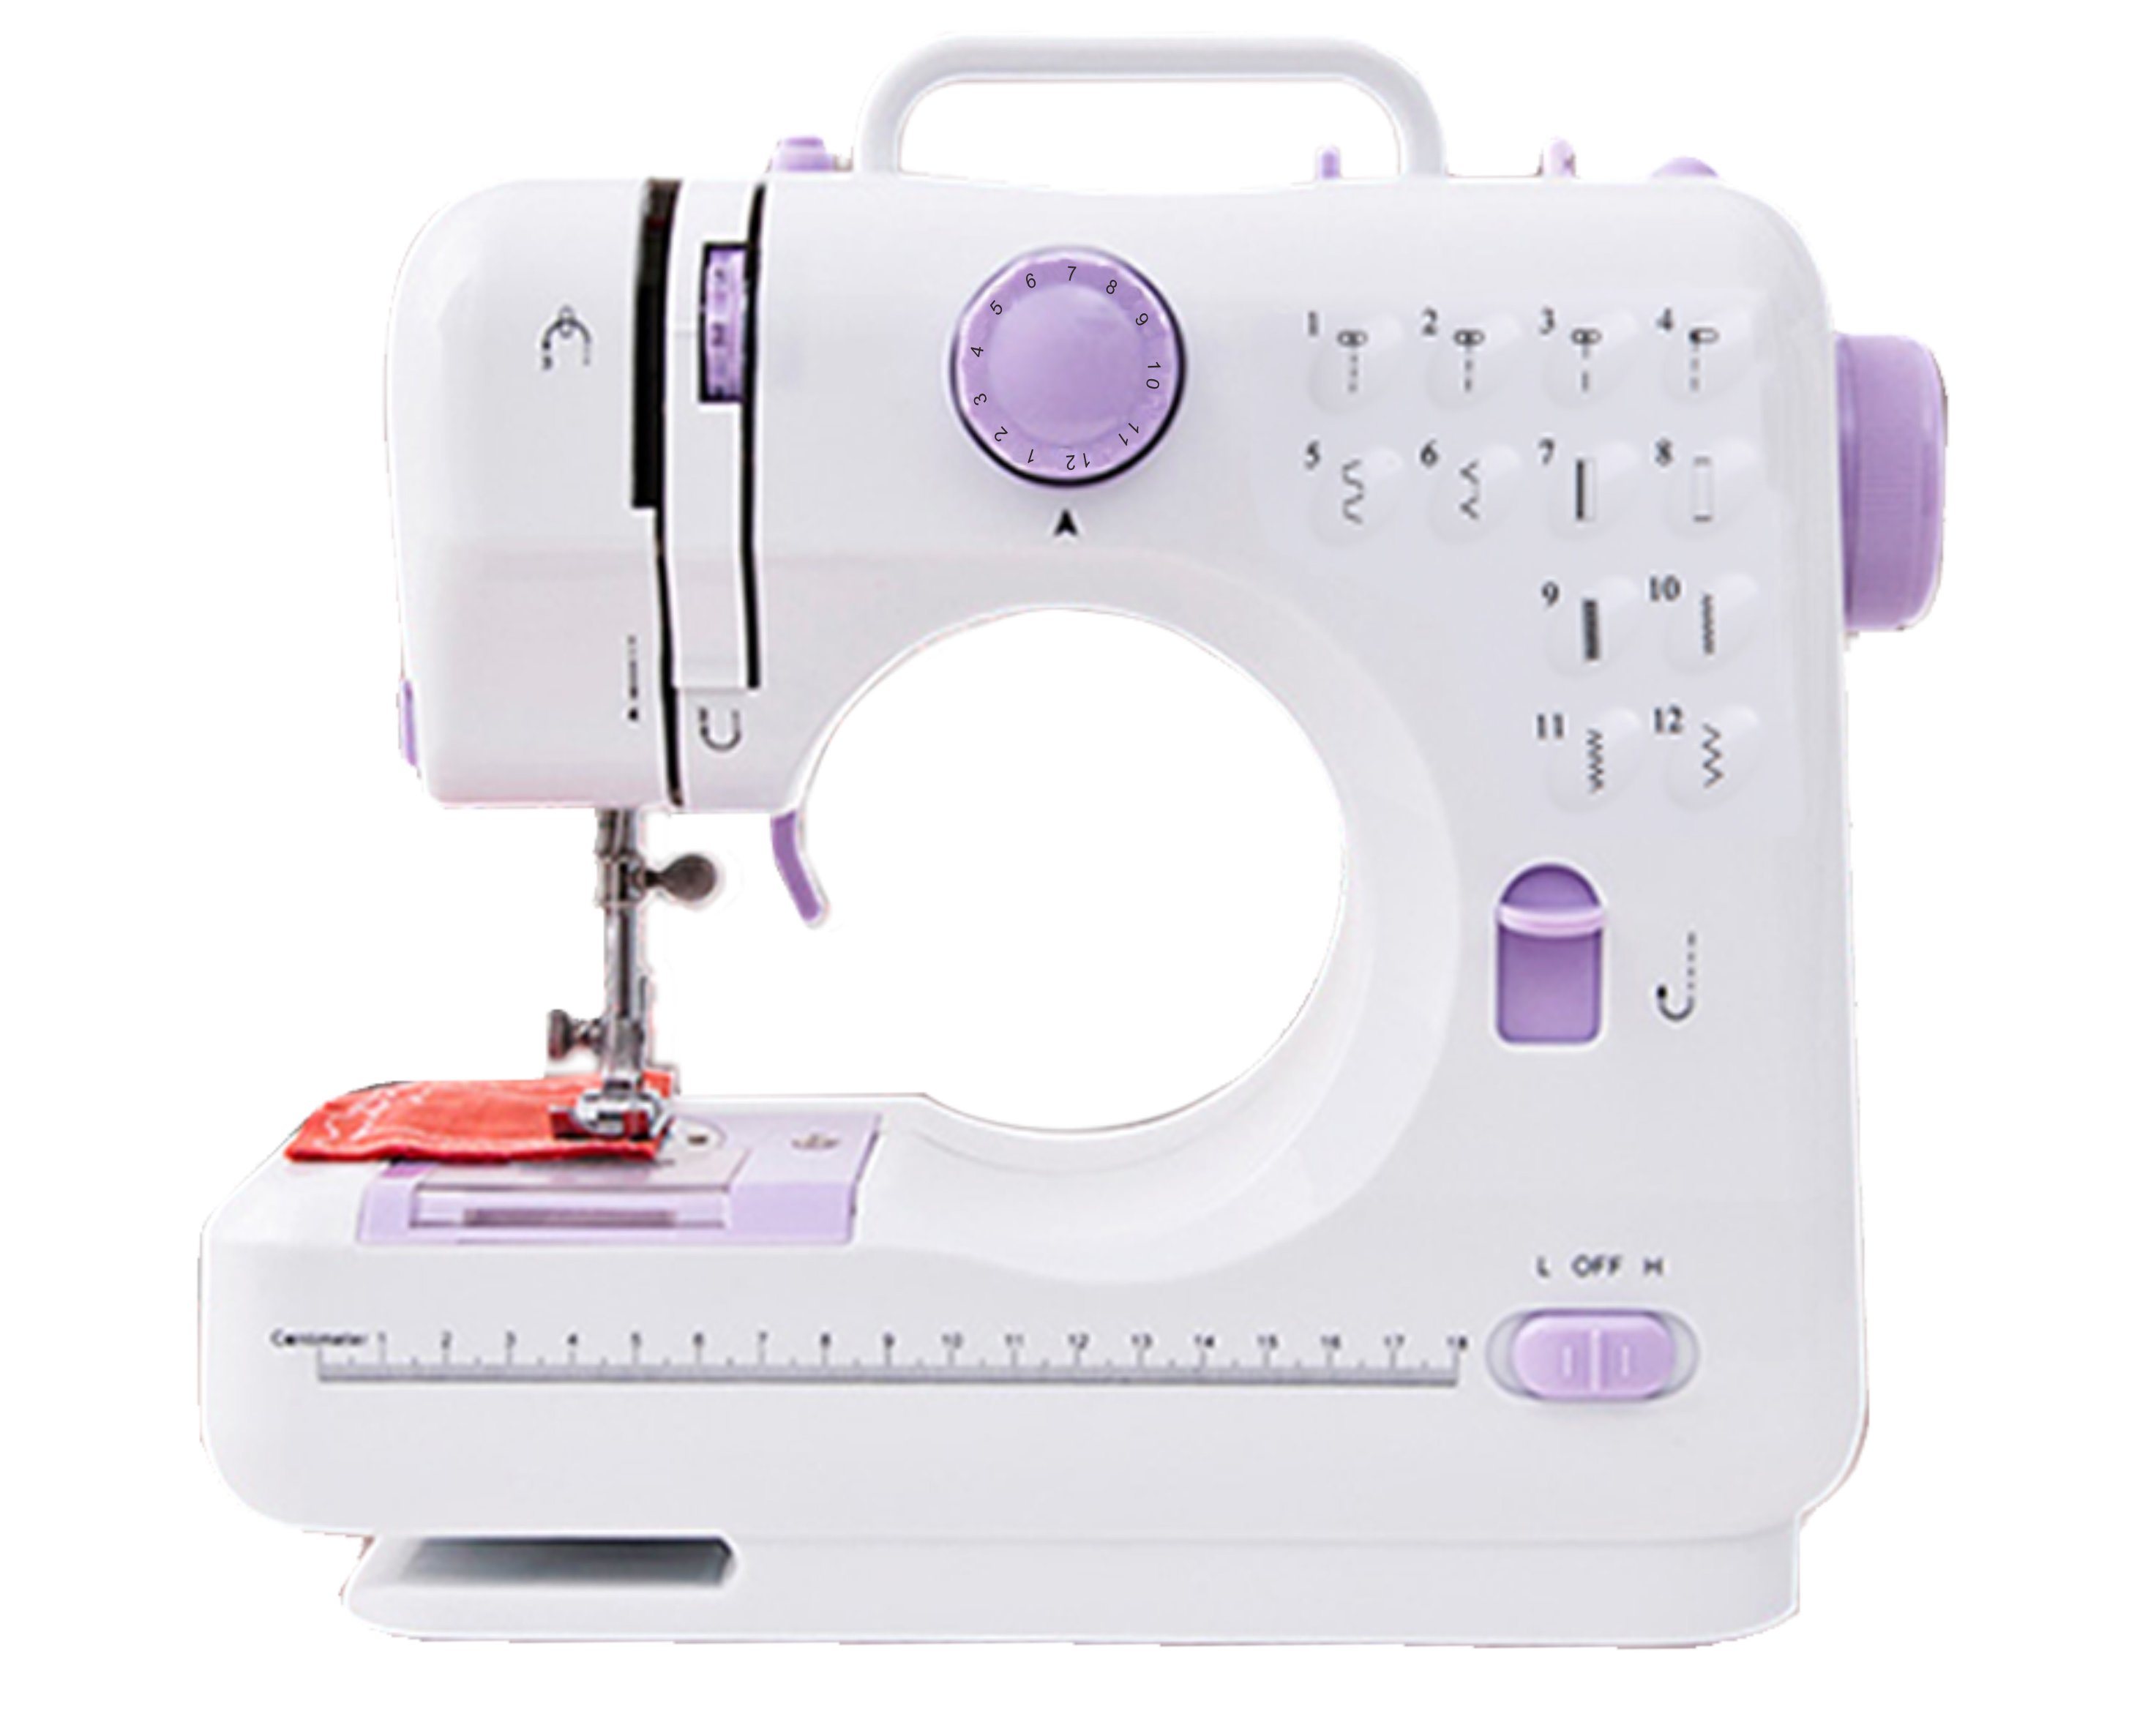 Domestic Lockstitch Electric Mini Sewing Machine for Household (FHSM-505)